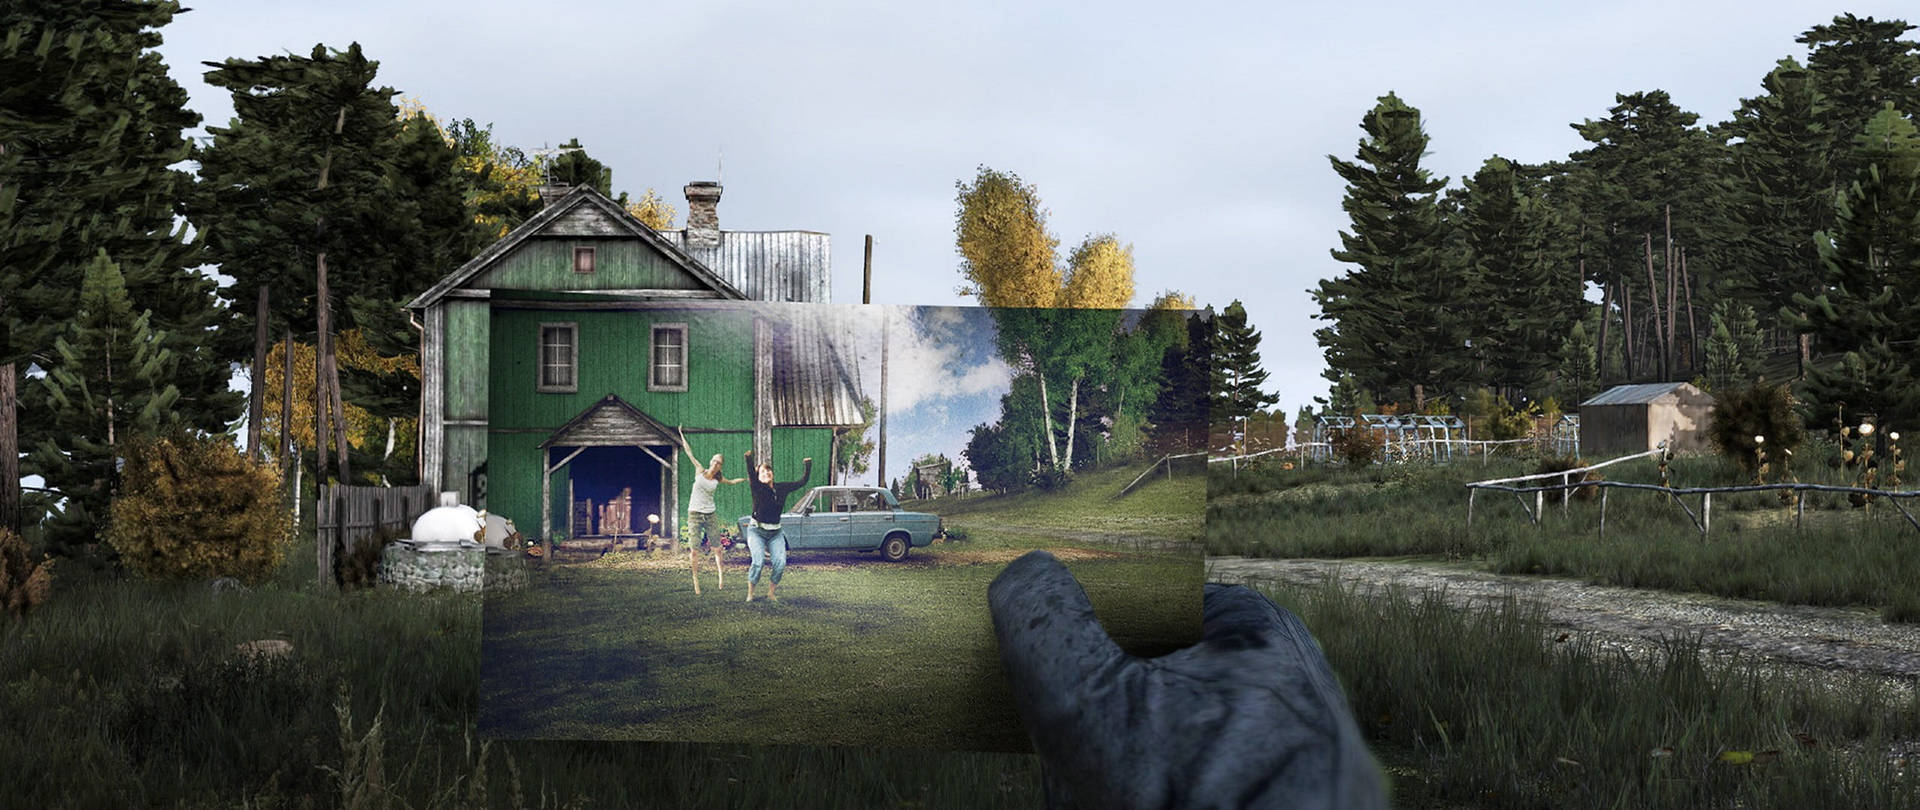 Dayz Zombie Photograph Picture